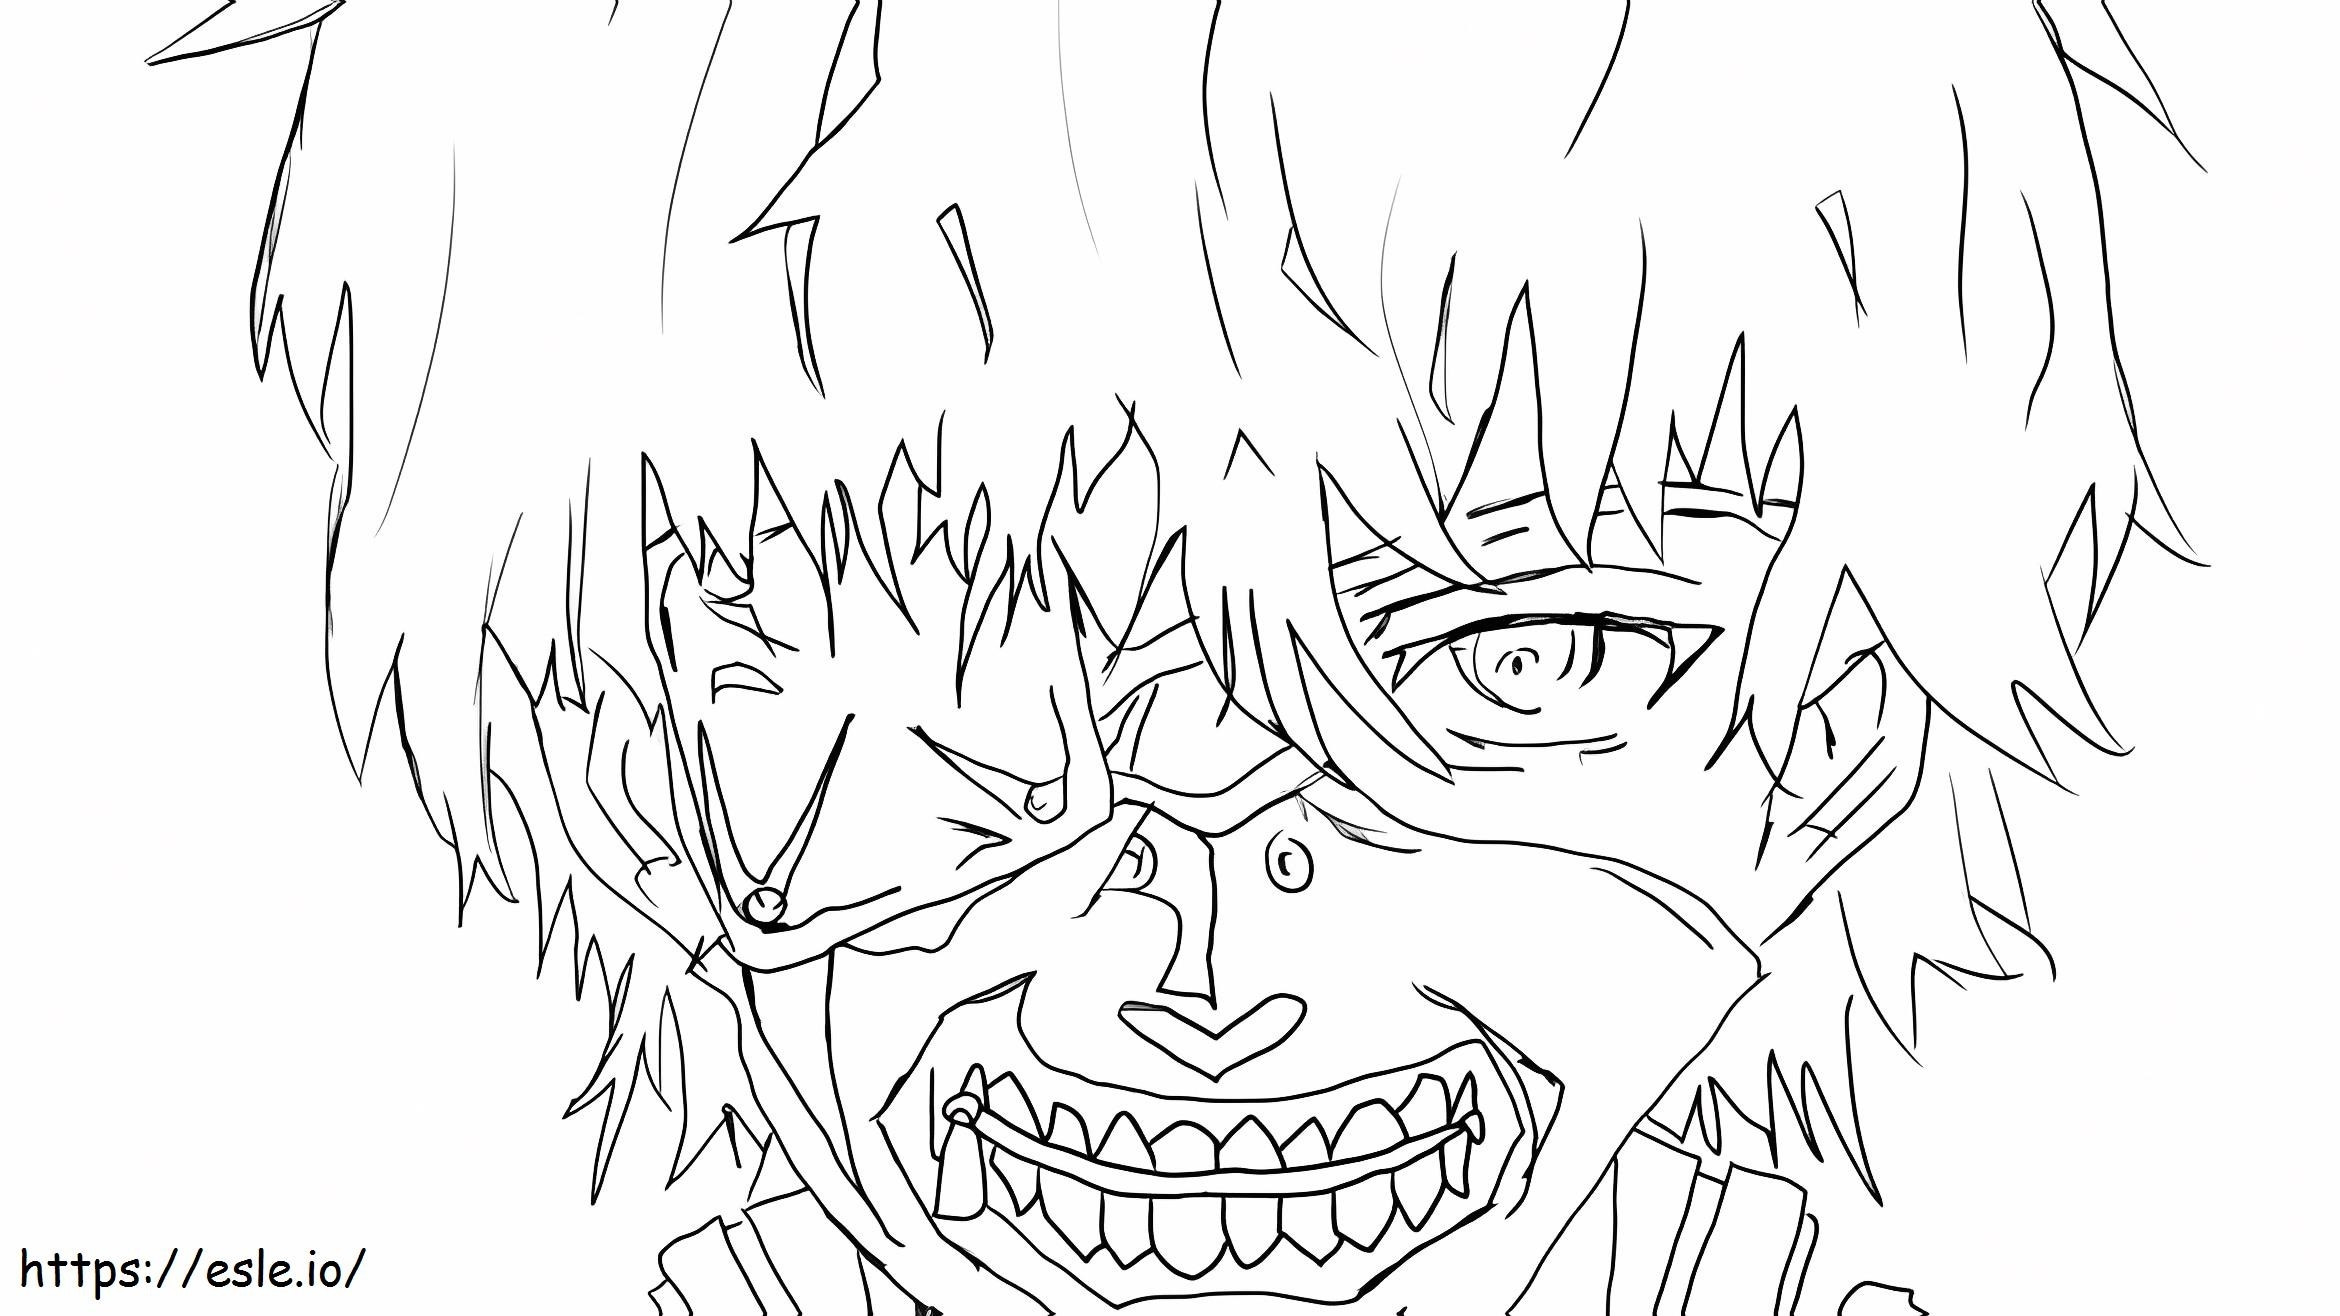 1540355522 1 Ghoul Free Tokyo coloring page